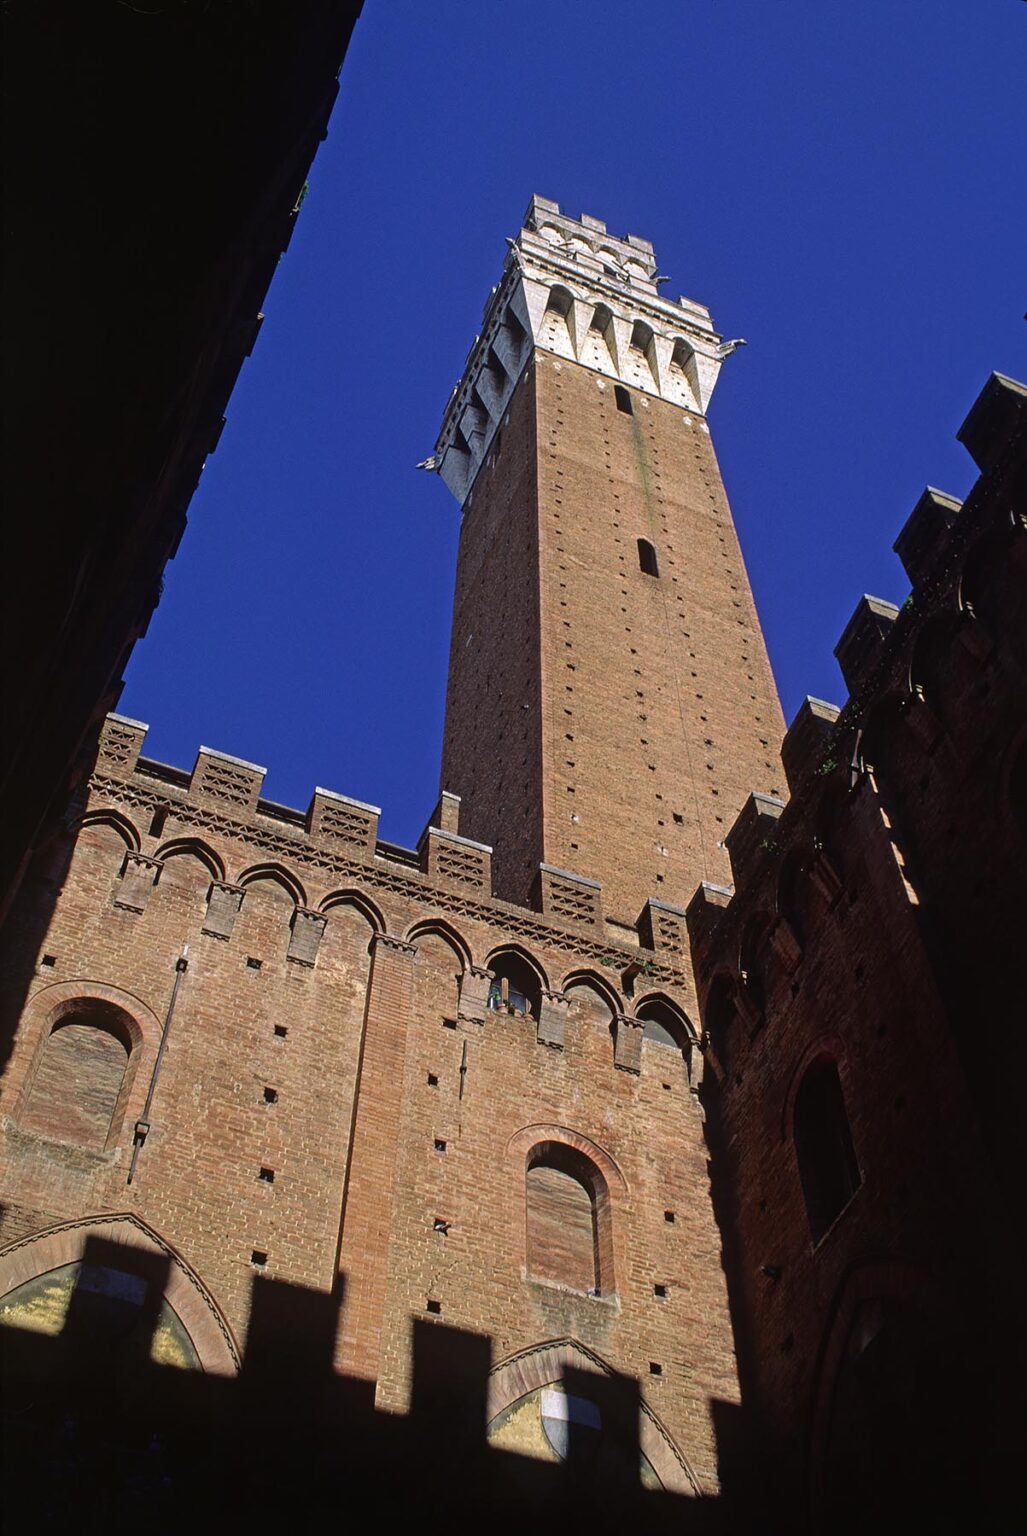 BELL TOWER of the PALAZZO PUBLICO in the CAMPO (central plaza) of the MEDIEVAL city of SIENA - TUSCANY, ITA